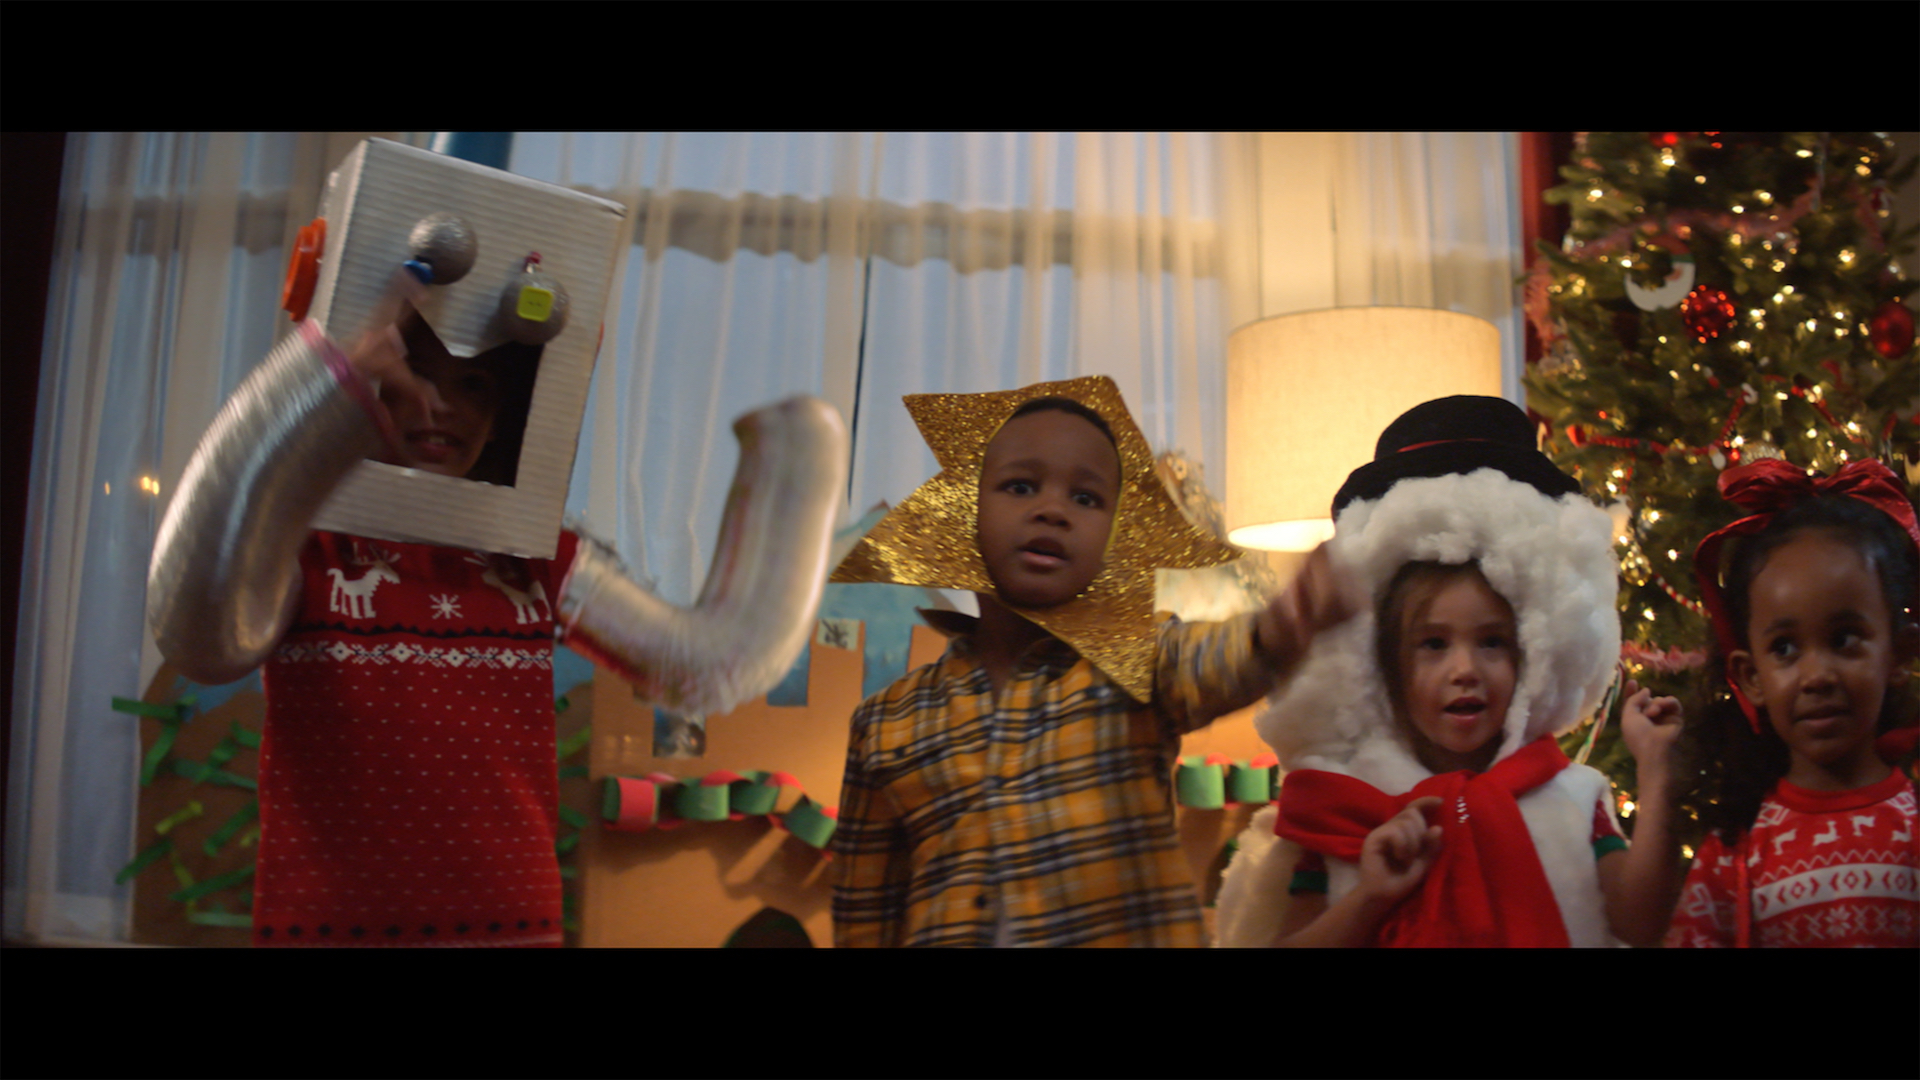 m s christmas advert 2020 Christmas Adverts 2019 Watch Retailers From Argos To M S And Amazon Launch Their Festive Ad Campaigns Cityam Cityam m s christmas advert 2020